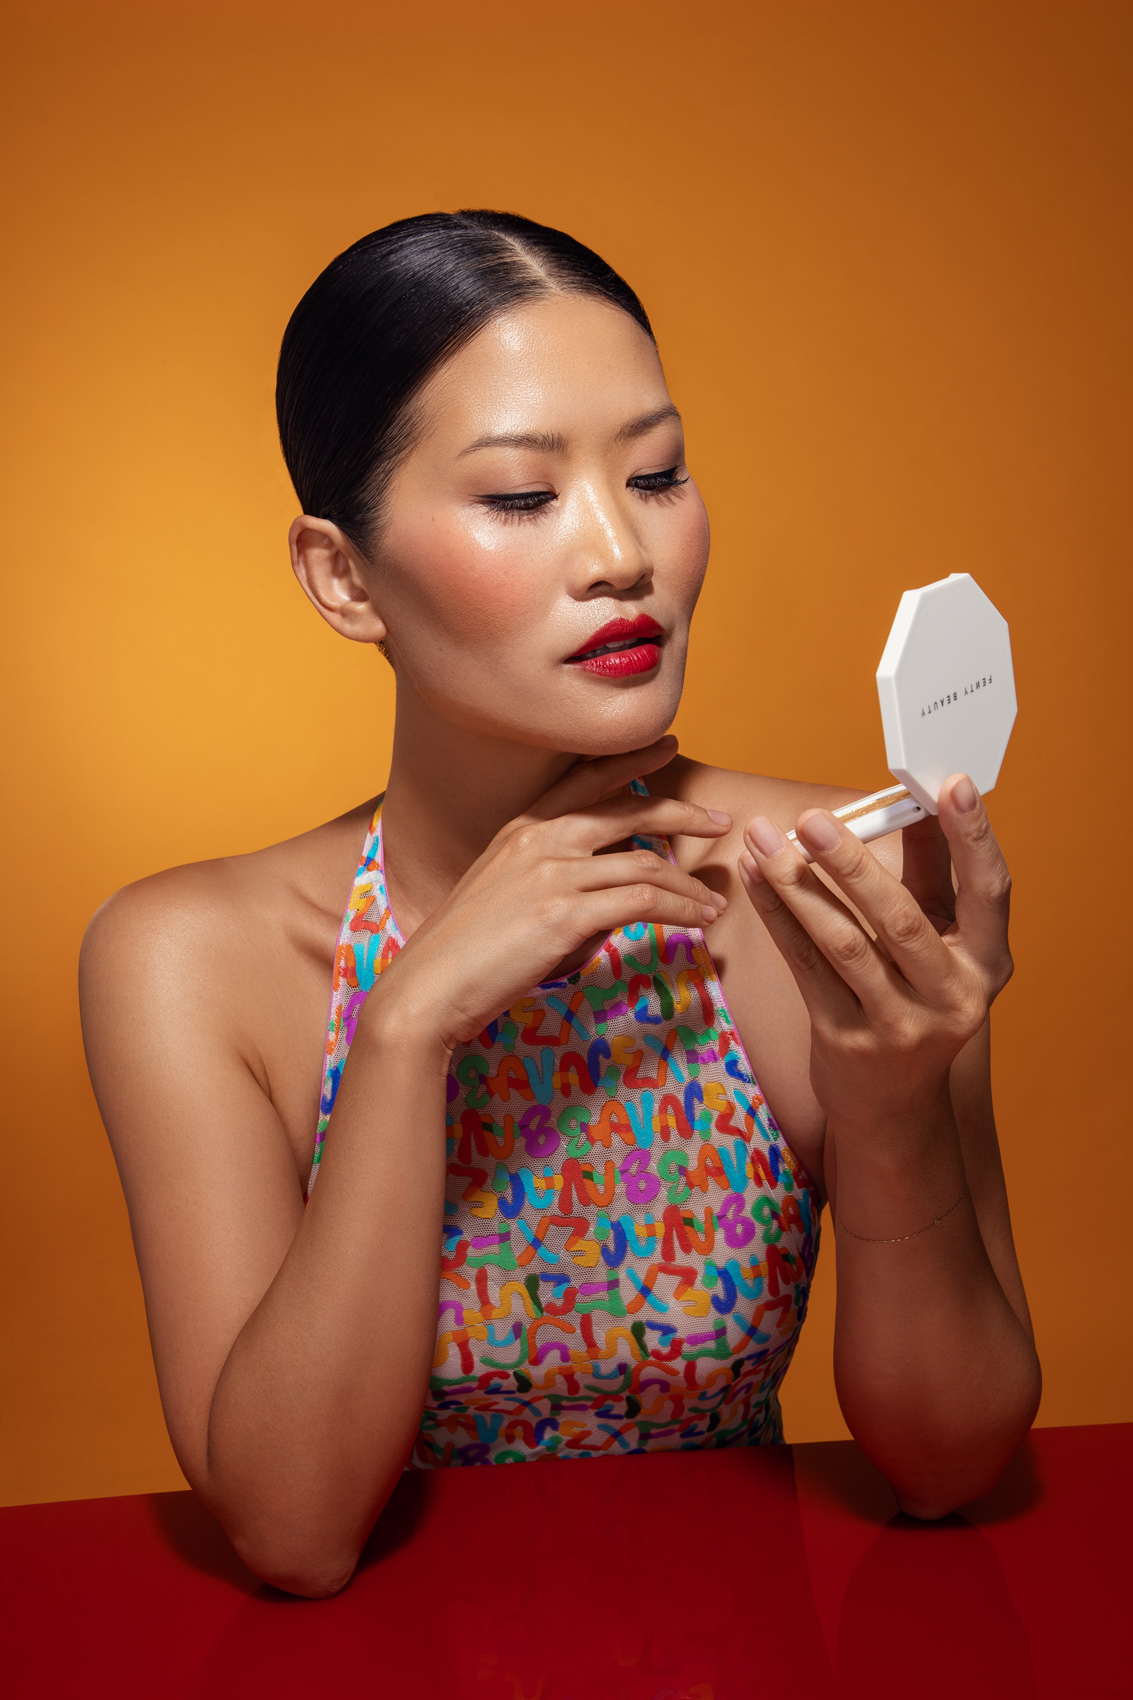 Danielle_Yu-10478_web Beauty editorial phtoography by Ylva Erevall